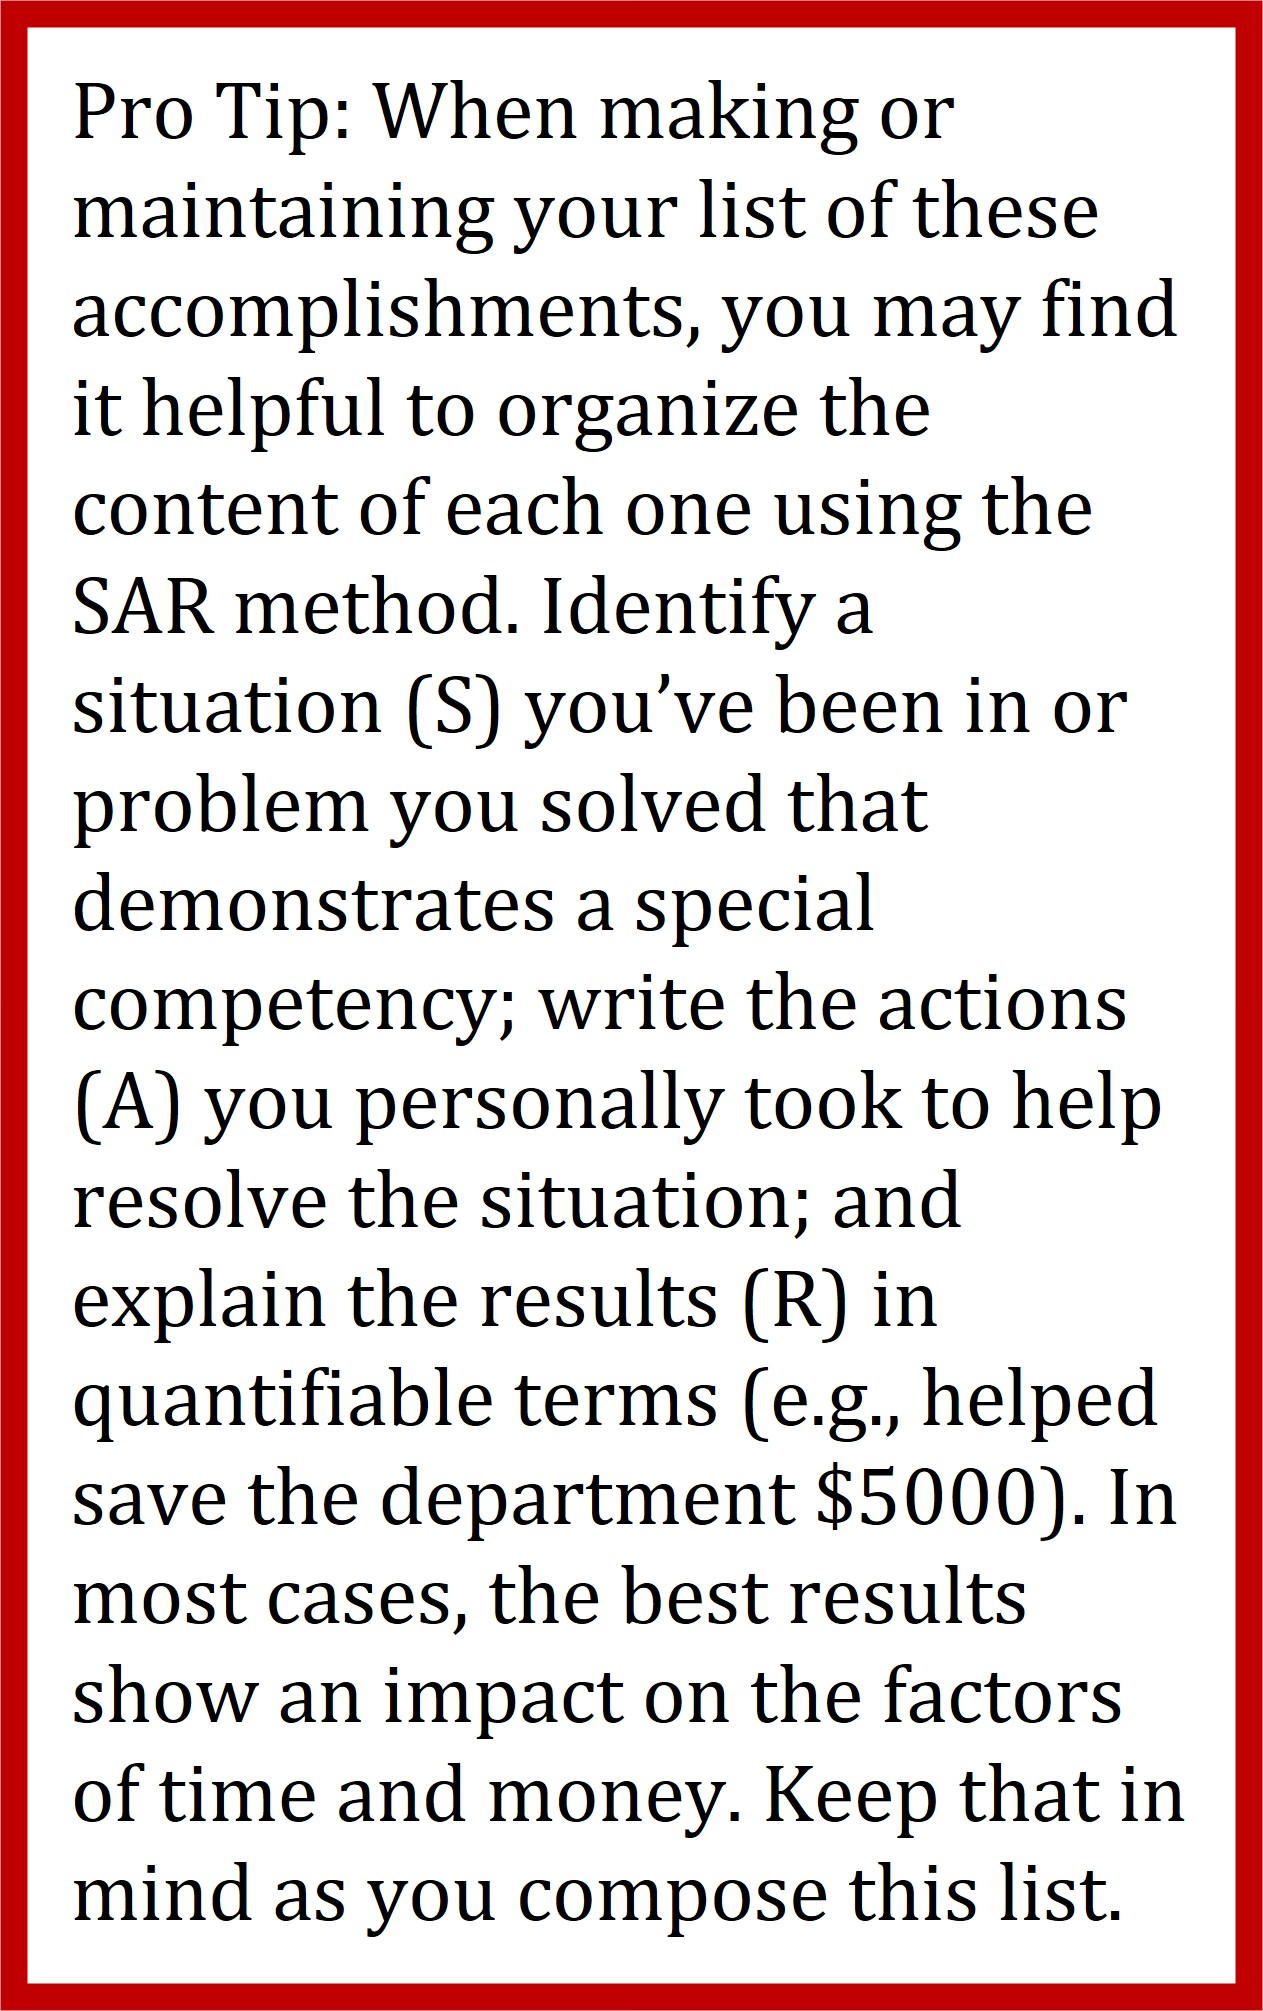 Pro Tip about organizing team successes using the SAR (situation, action, result) method.